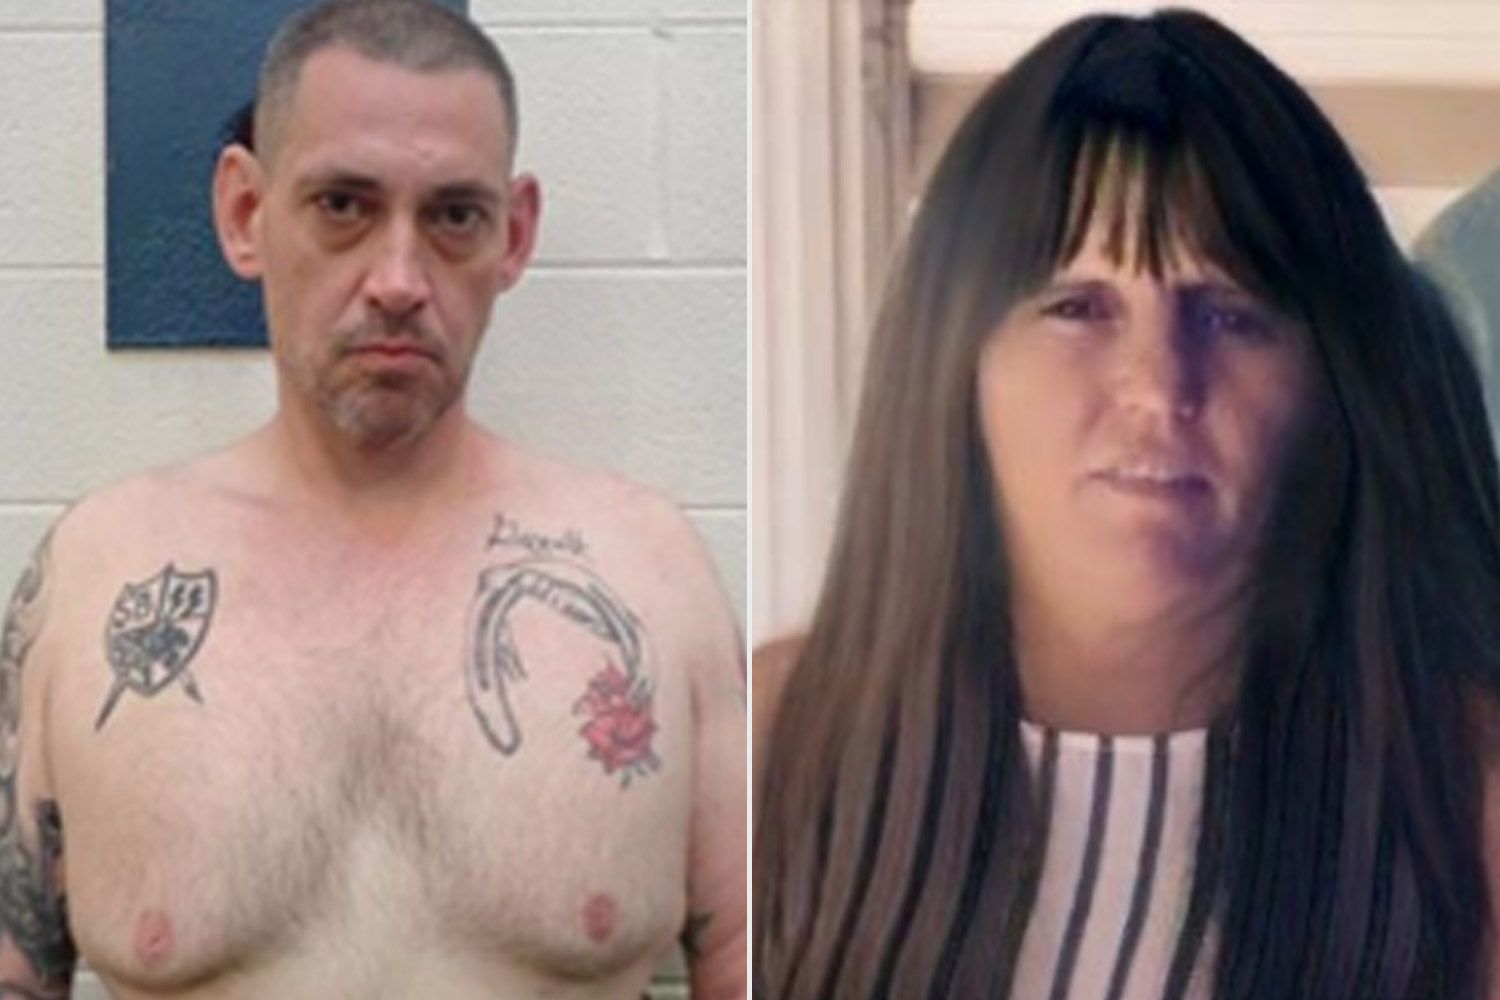 Federal authorities have released images of Casey White's tattoos as well as what Vicky White could look like with dark hair. Could we please tool up imagery for main of these pictures? LINK: https://www.usmarshals.gov/news/chron/2022/050522.htm#new_tab